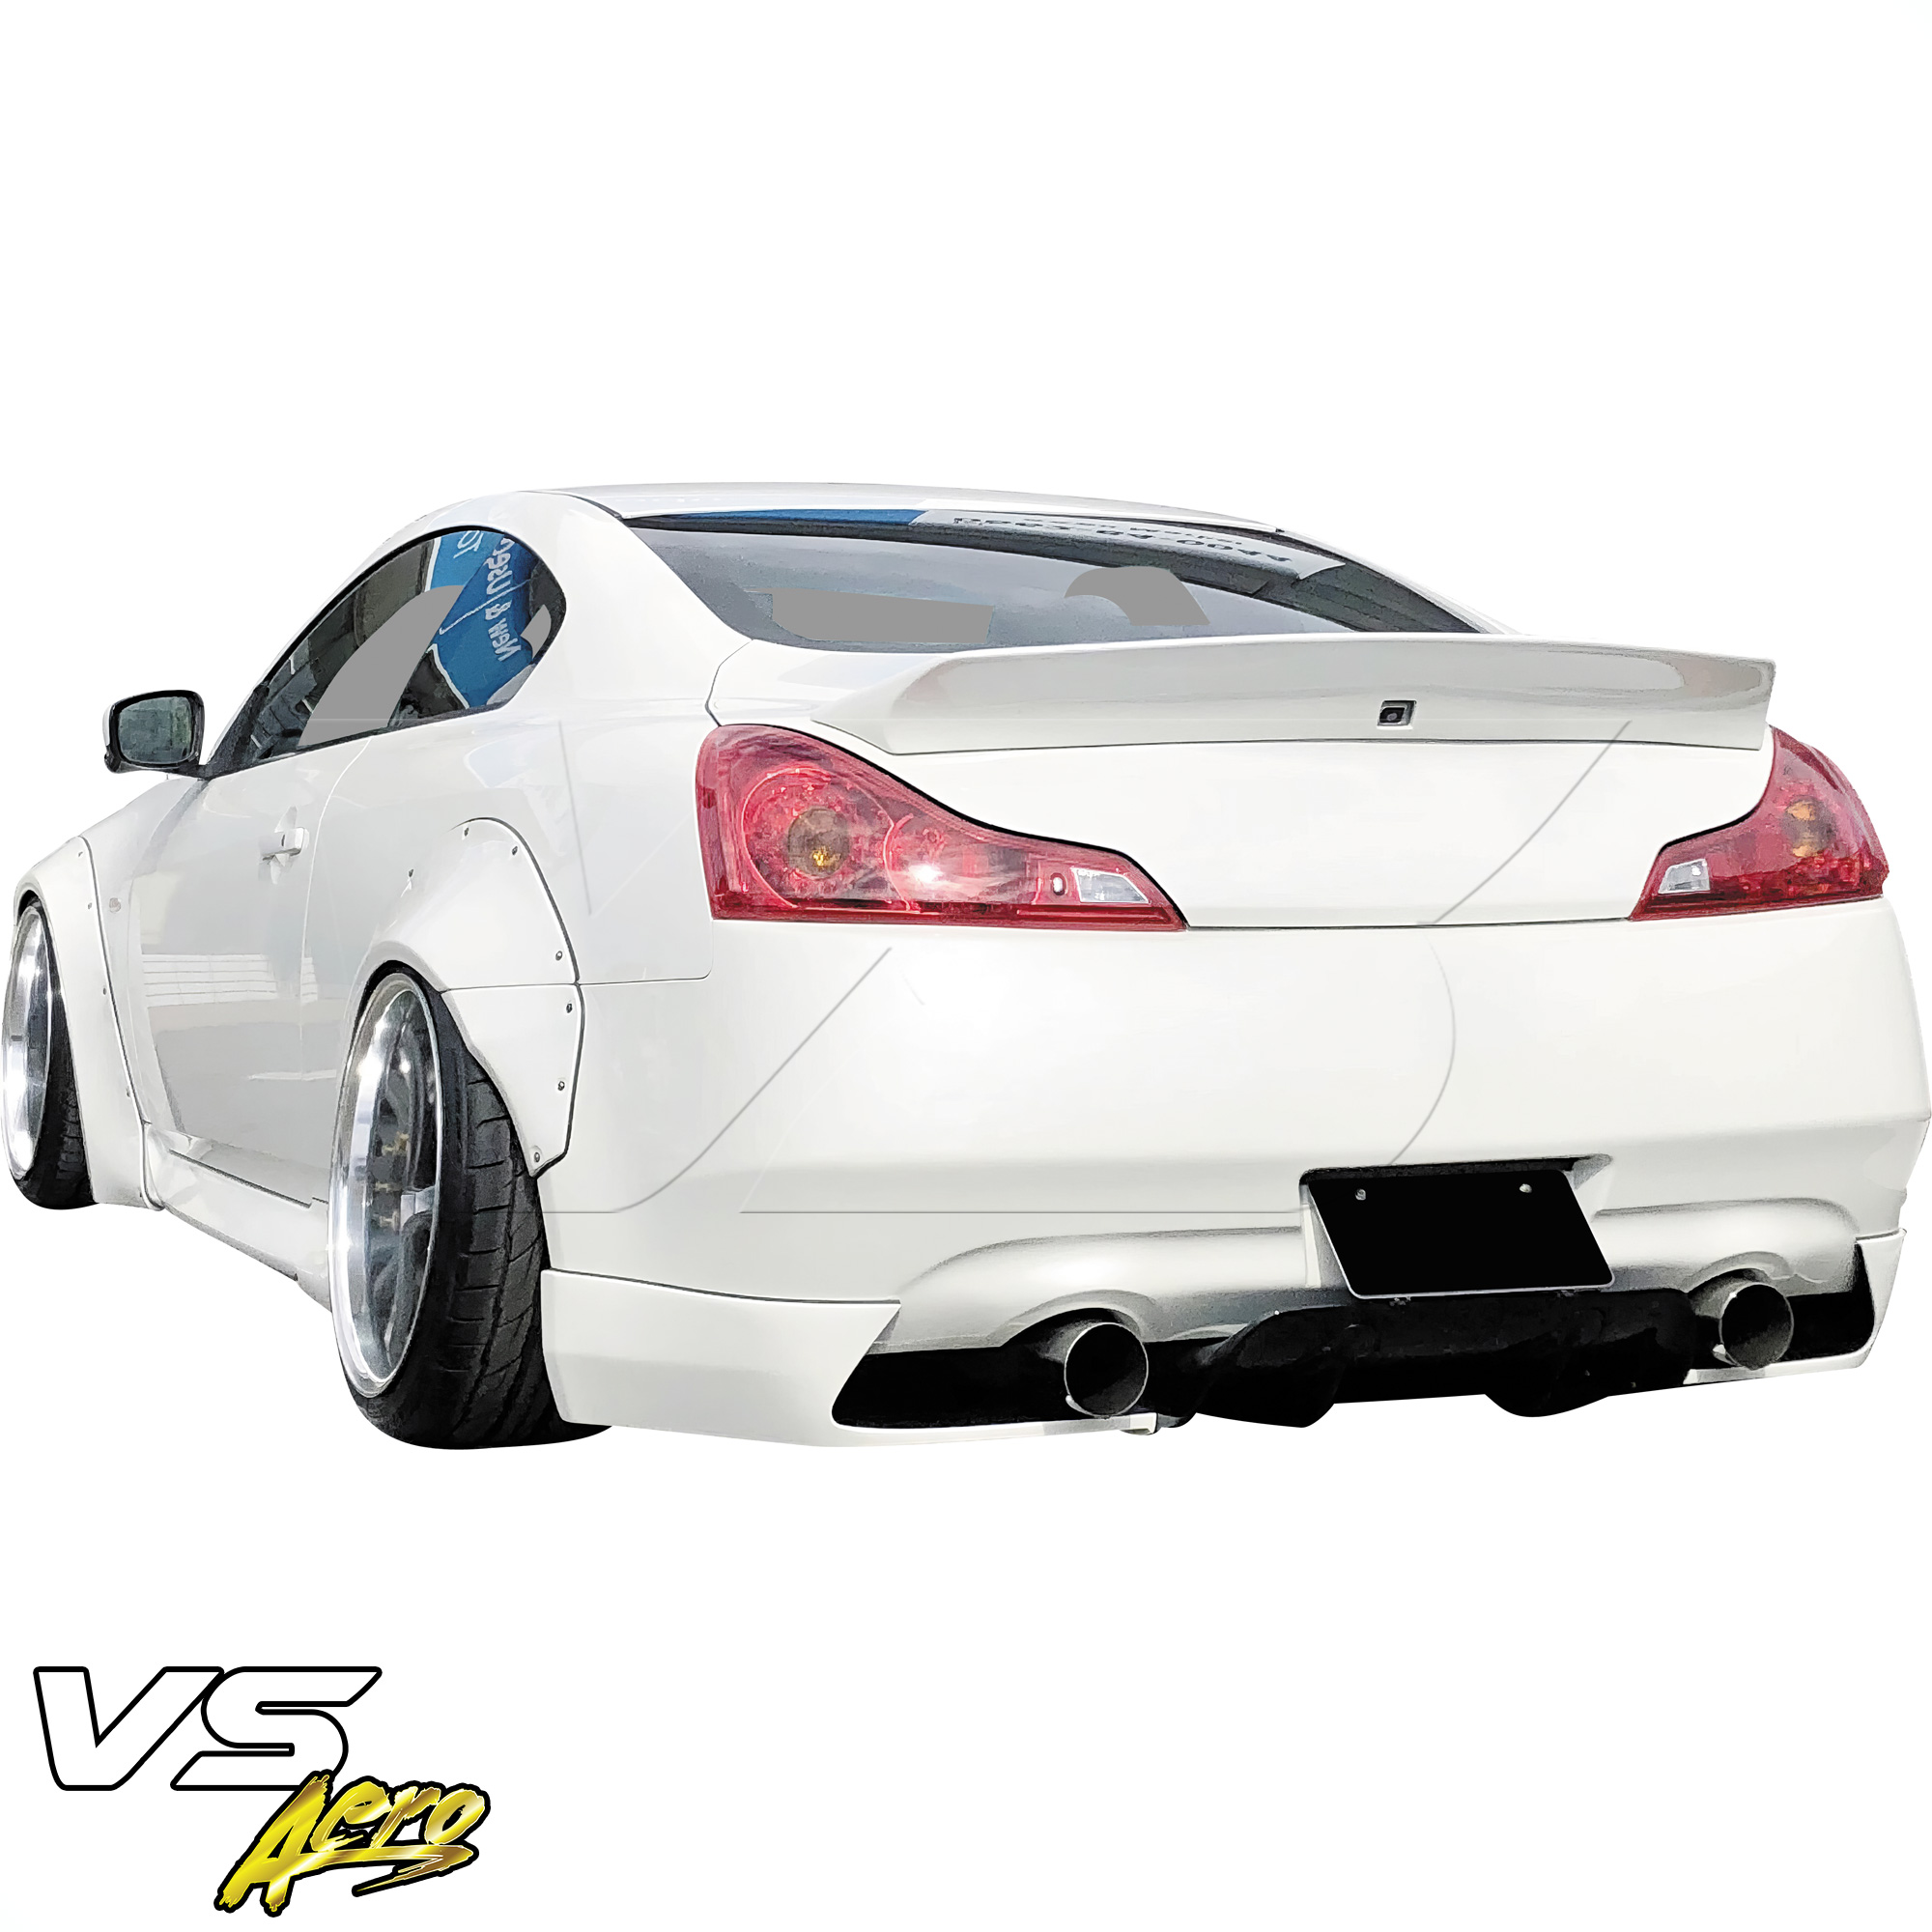 VSaero FRP LBPE Wide Body Fender Flares (rear) 4pc > Infiniti G37 Coupe 2008-2015 > 2dr Coupe - Image 29